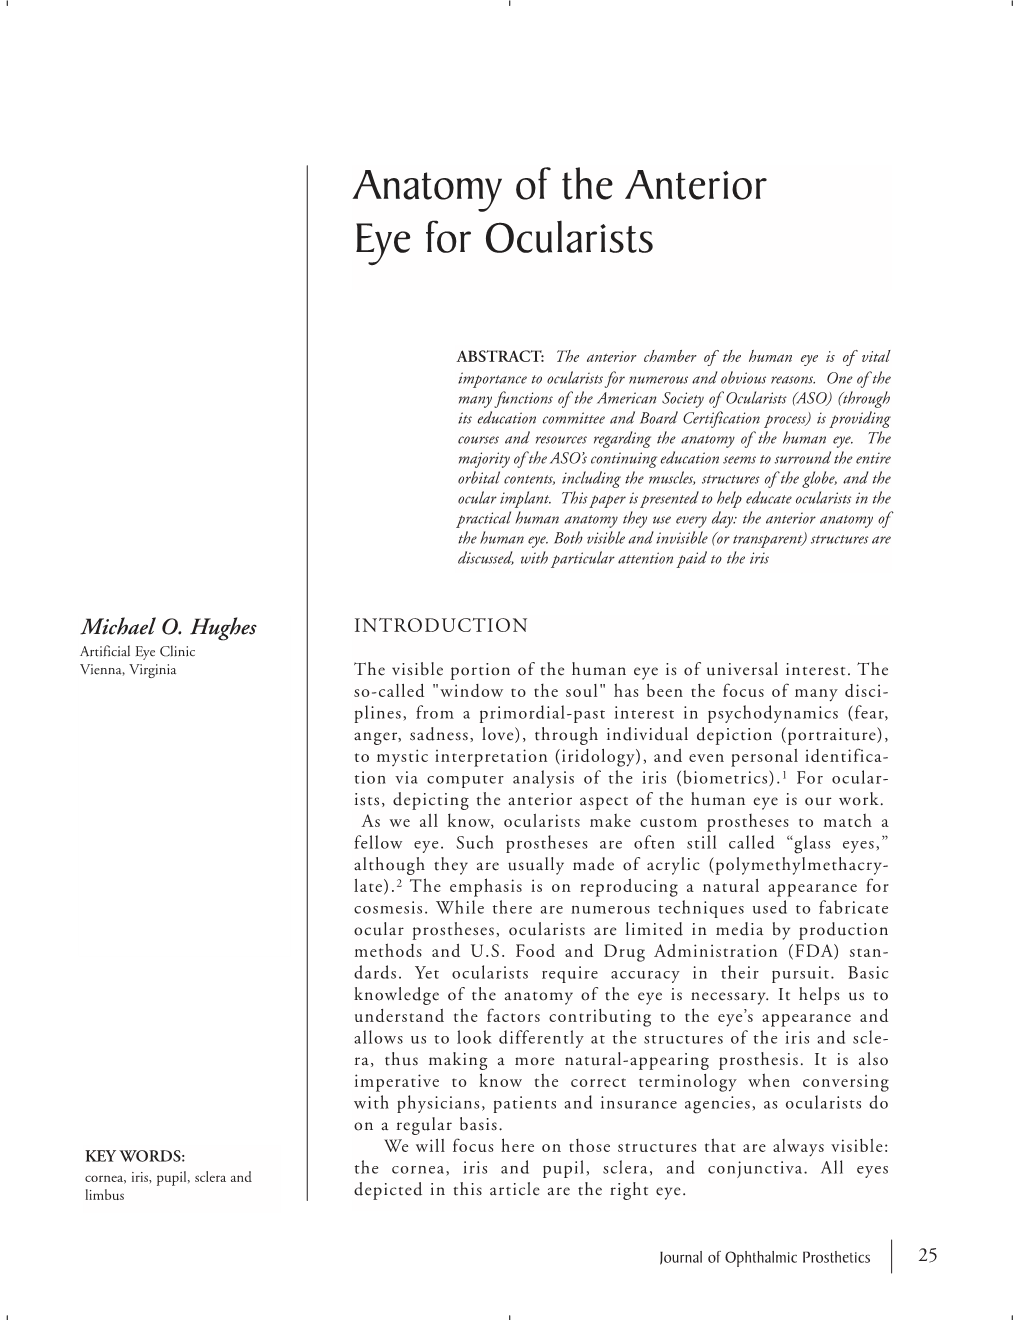 Anatomy of the Anterior Eye for Ocularists